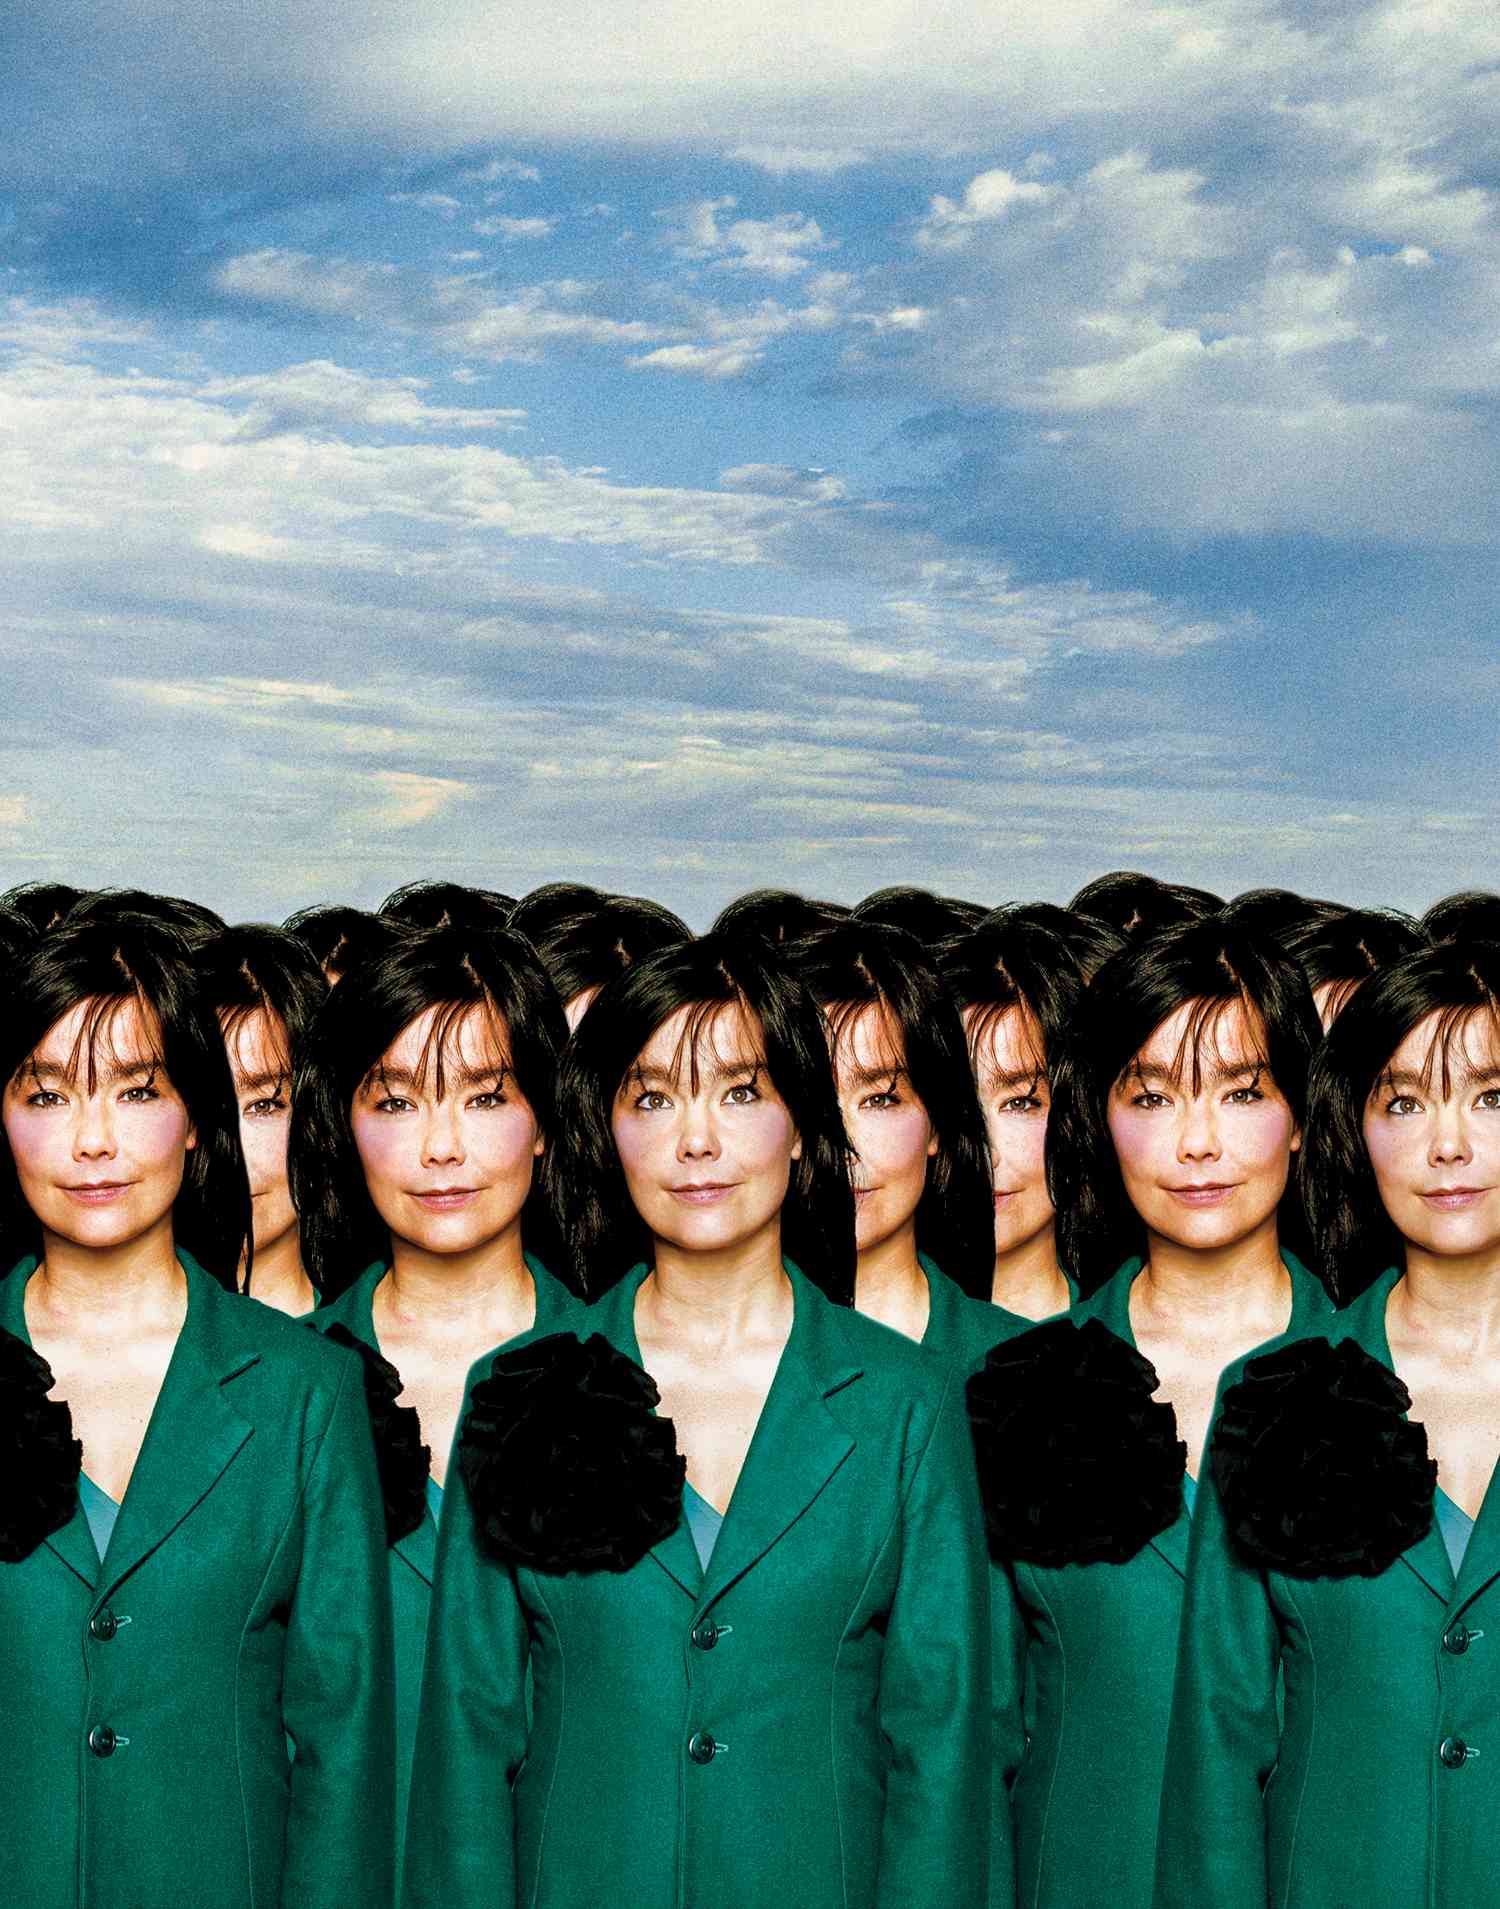 Iconic Image of bjork albums/songs cover by Warwick Saint